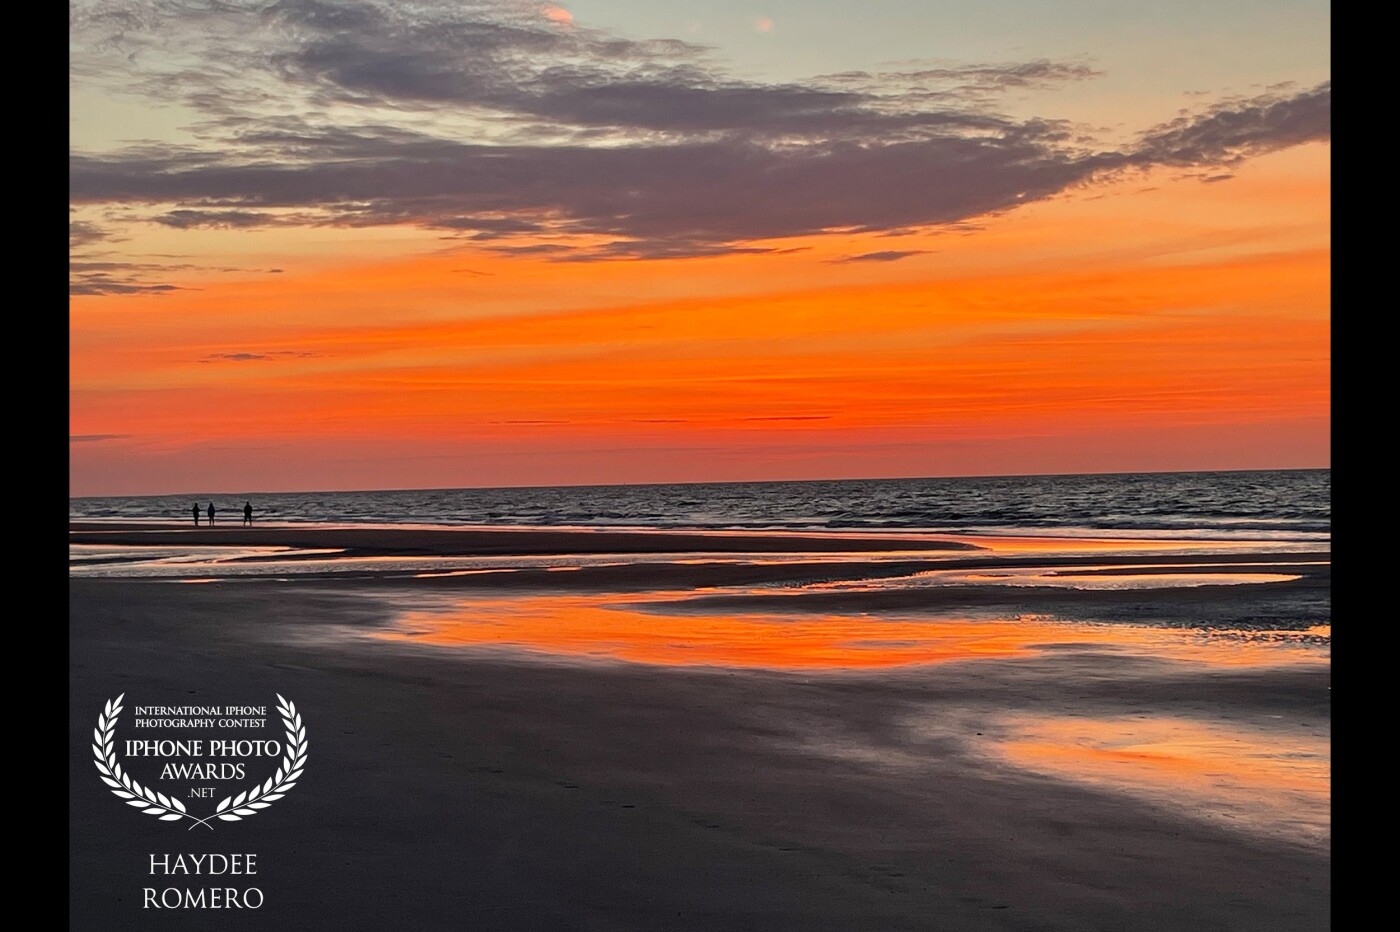 The rising sun casts deep orange colors across the sky and over the wet sand of the beach at Hilton Head in South Carolina, USA, on a recent morning.